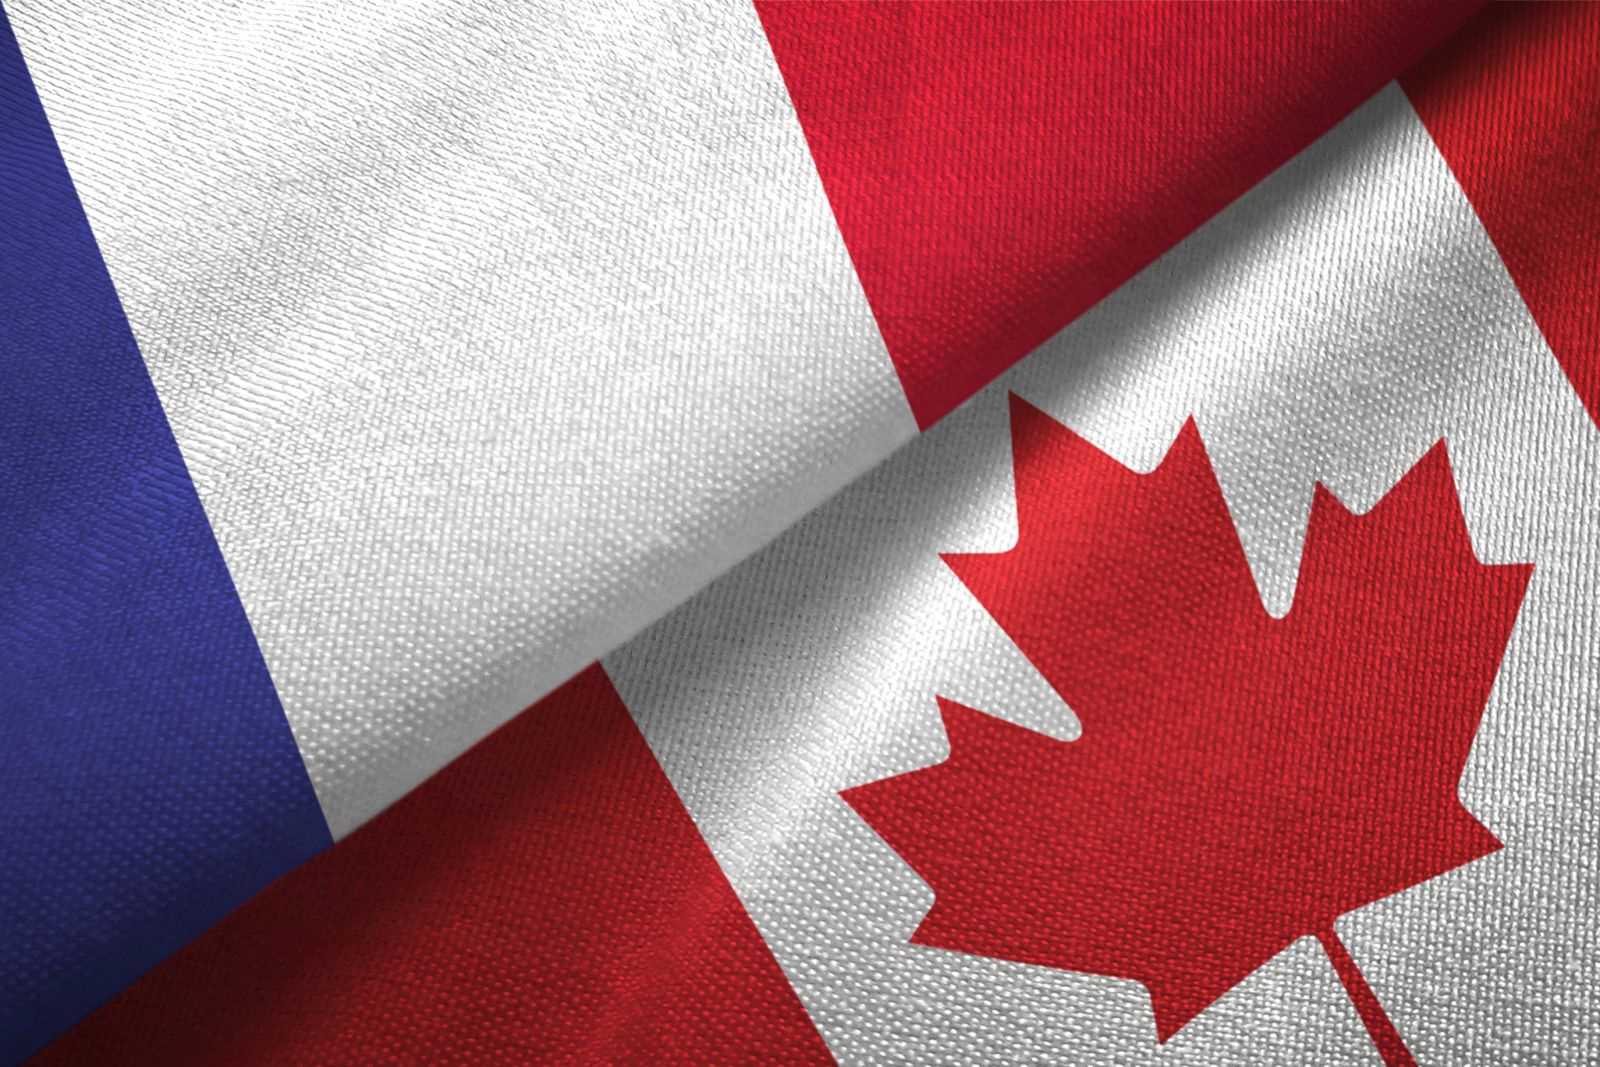 French-Canadian concept: French and Canadian flags draped on a tabletop